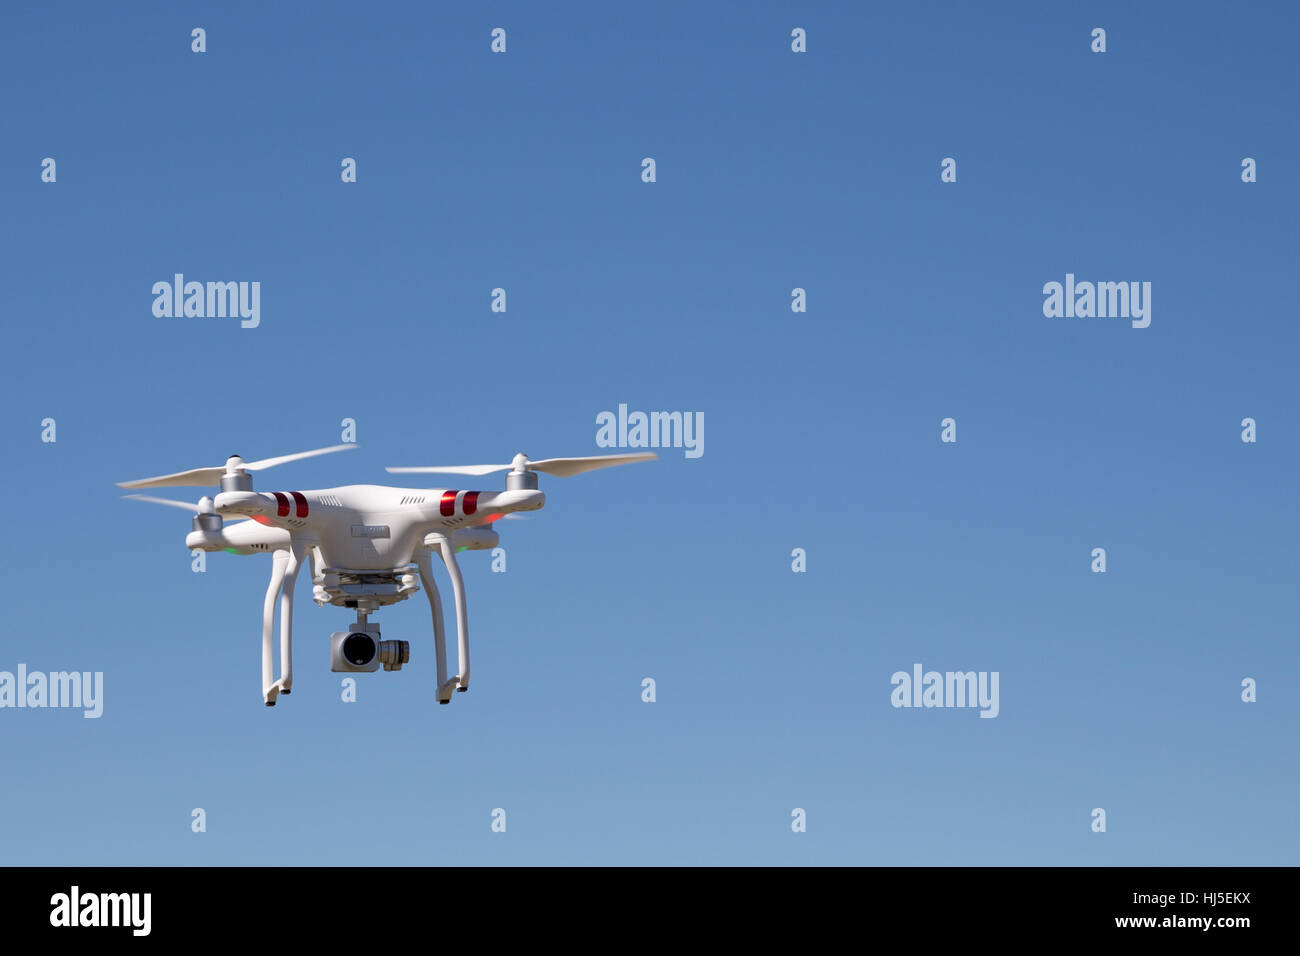 Unmanned Aerial Vehicle (UAV) or Drone against bright blue sky Stock Photo